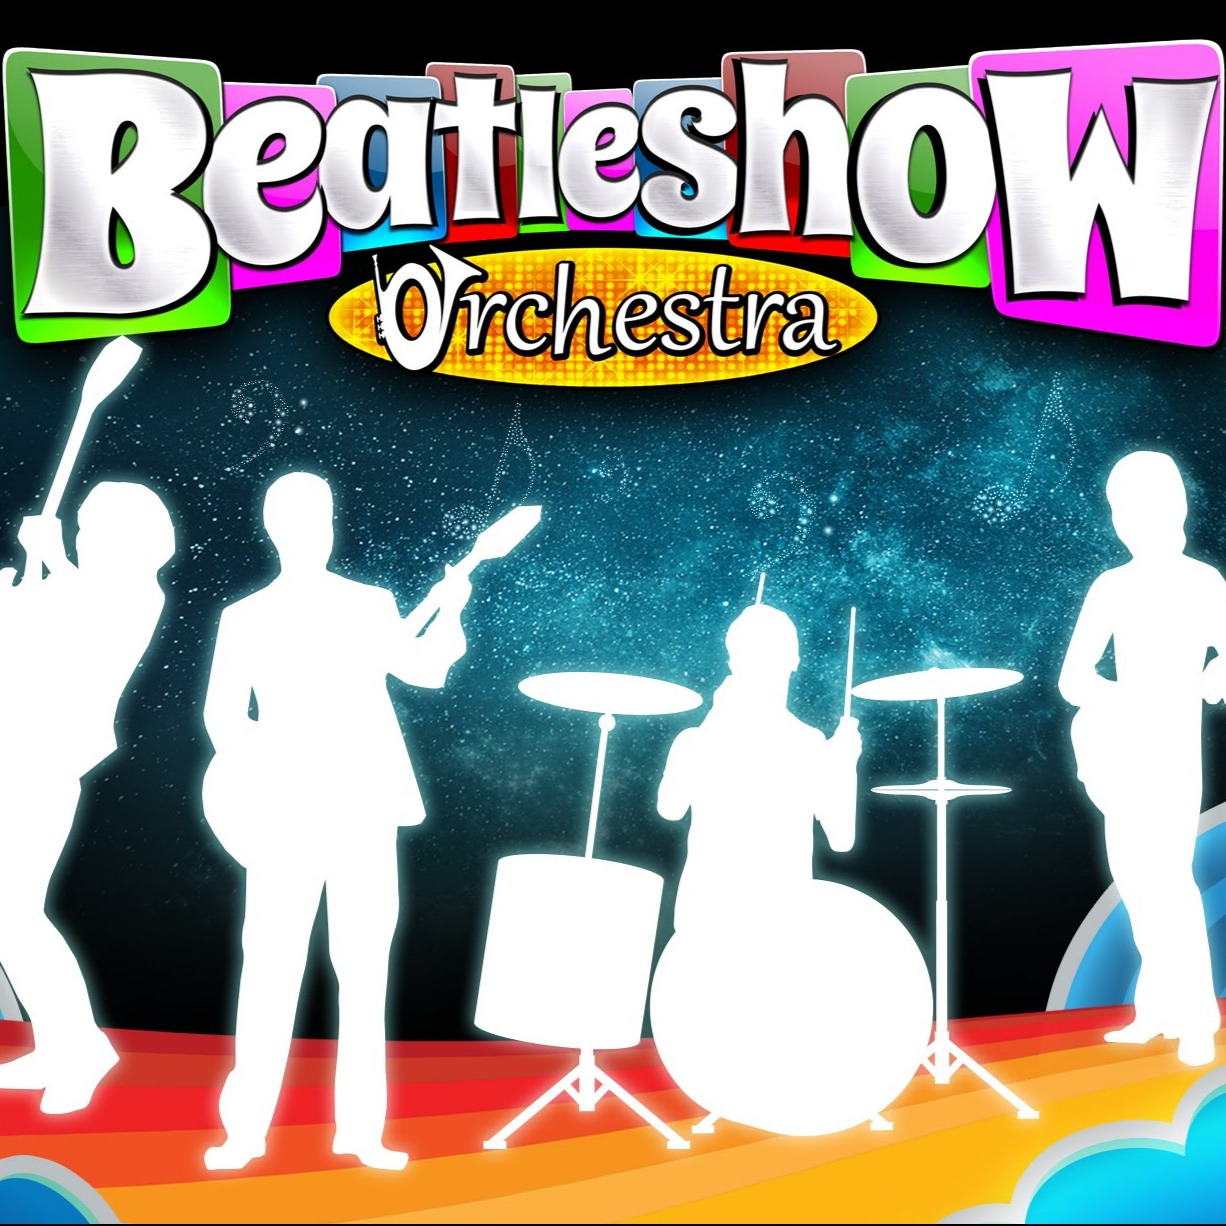 Beatleshow Concert Event 2018 | Buy  Tickets | At Saxe Theater 